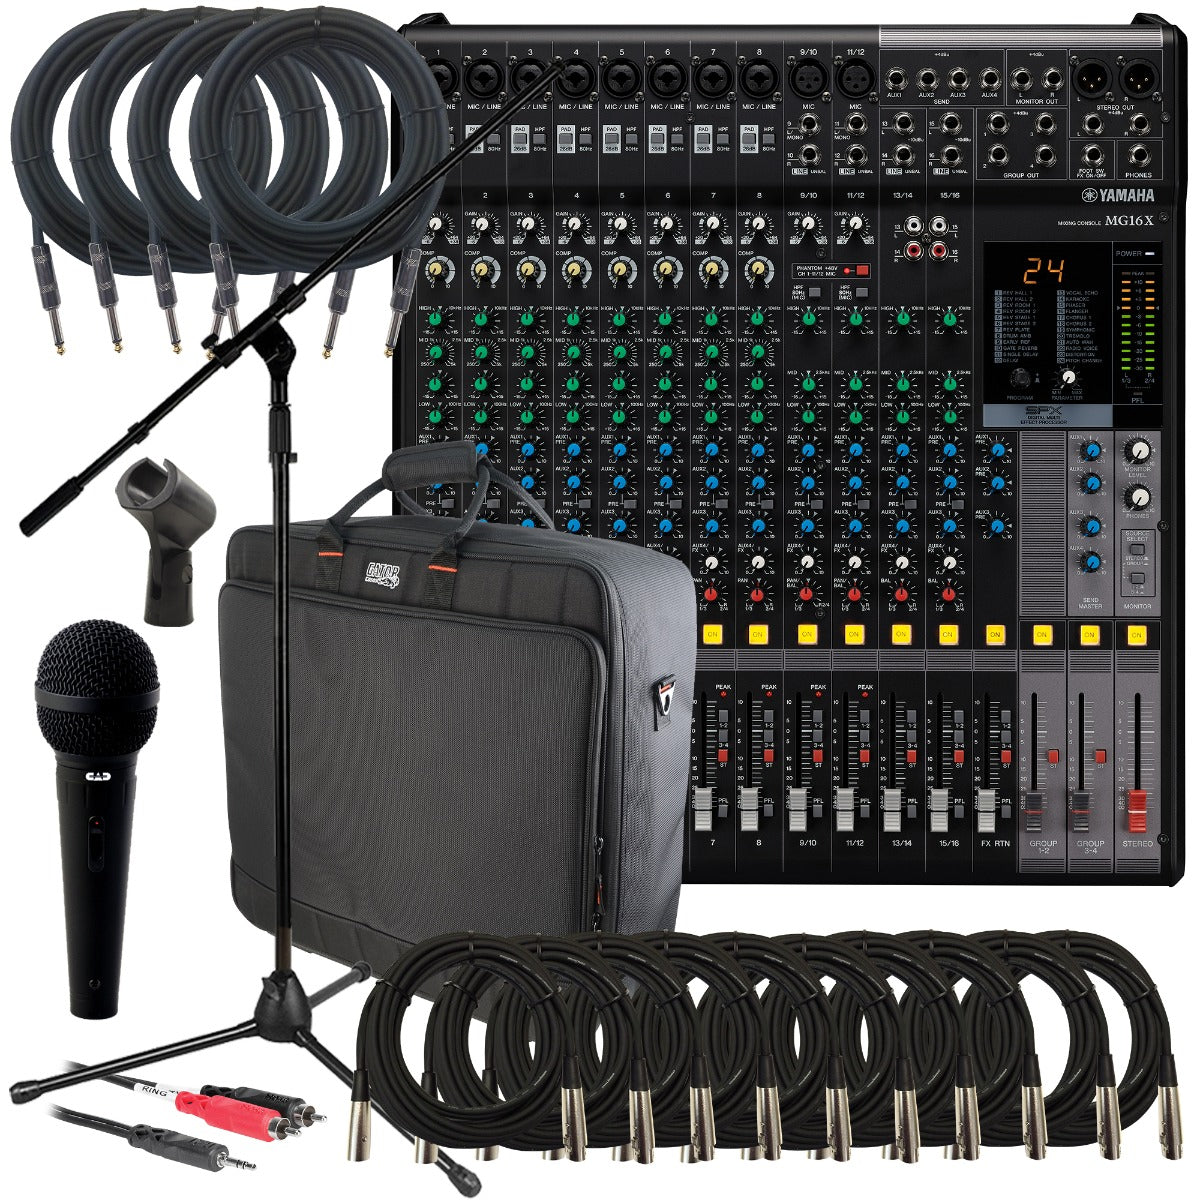 Collage of the components in the Yamaha MG16X 16-Input Stereo Mixer with Effects PERFORMER PAK bundle